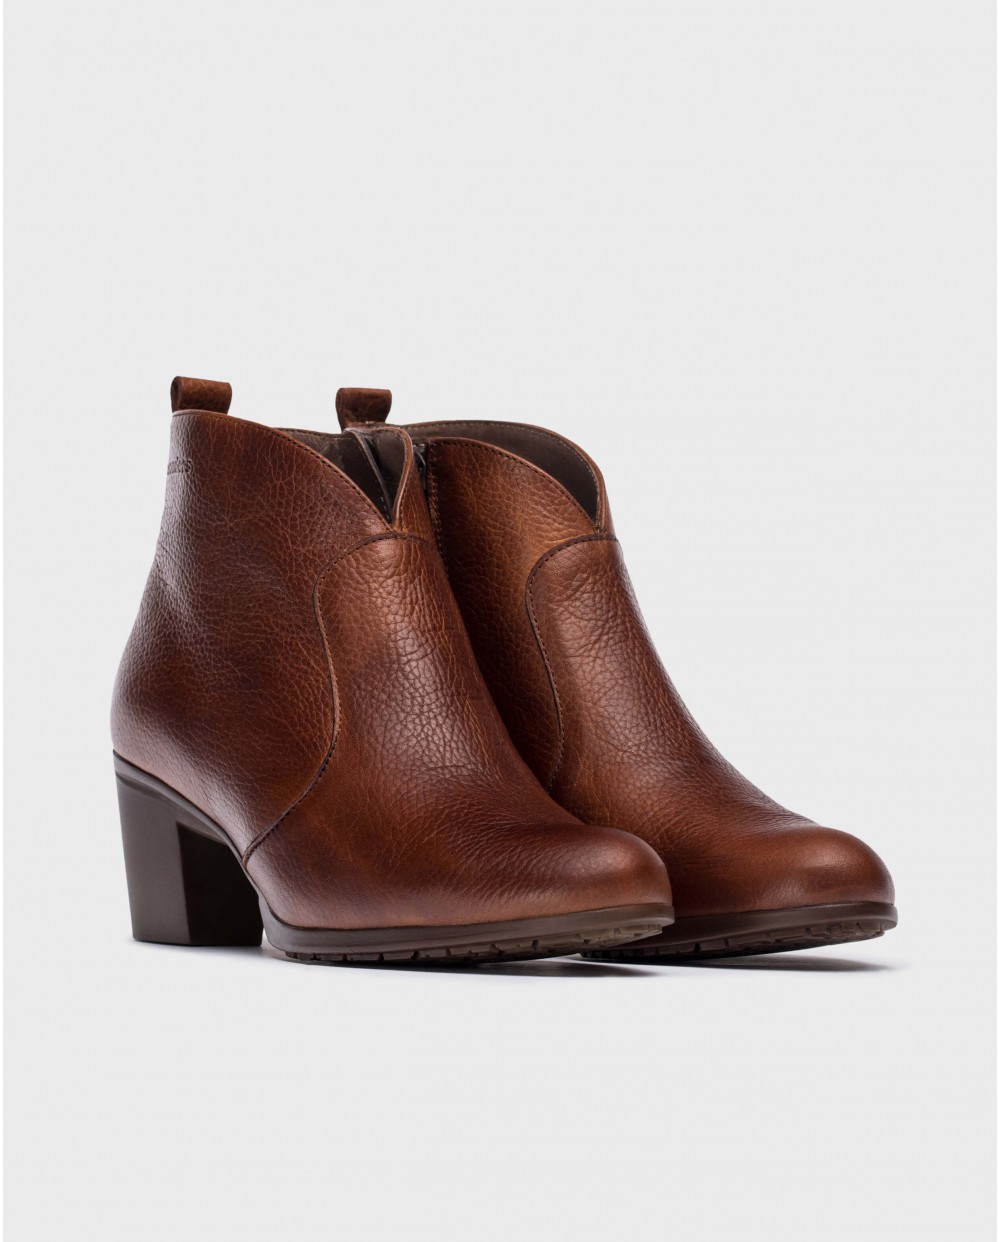 Brown smooth leather ankle boot